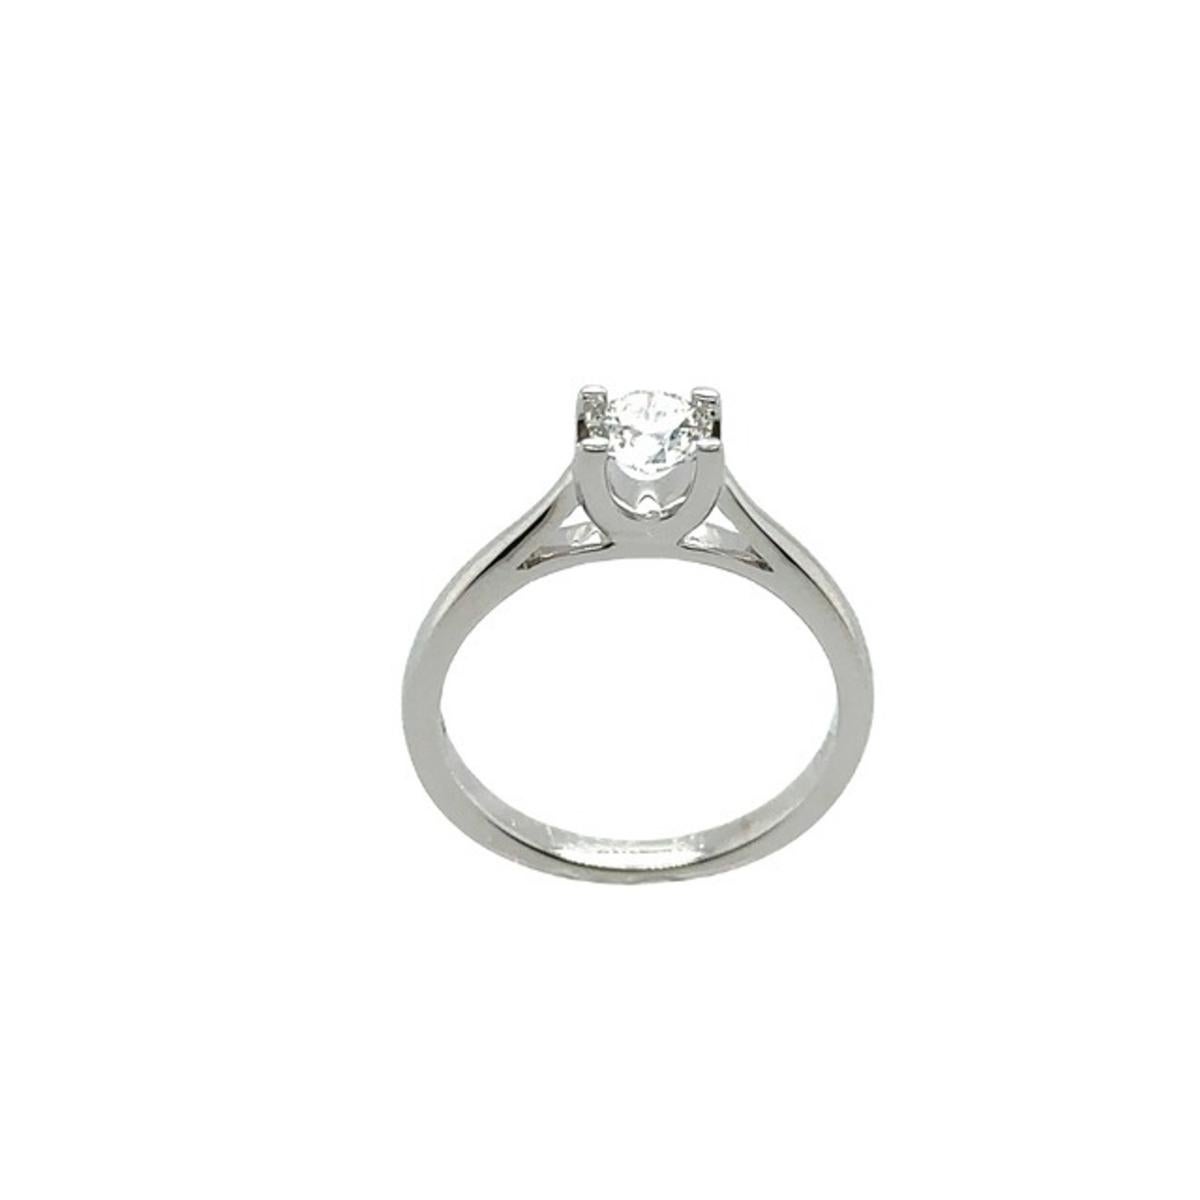 An elegant diamond ring for your engagement, set with 0.39ct round brilliant cut natural diamond in 18ct white gold 4 claw setting, with inside engraving 